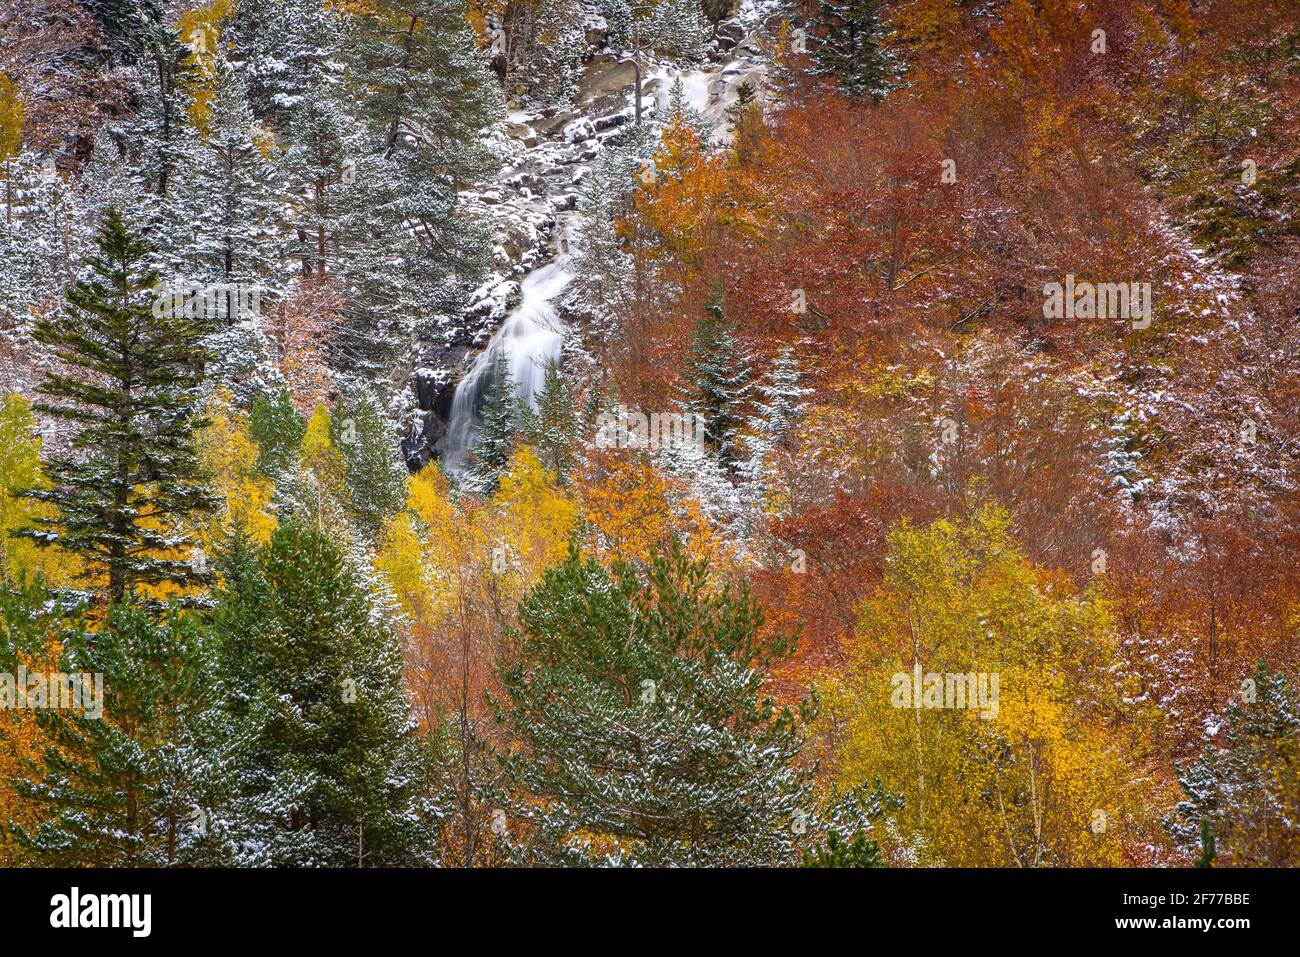 Autumn mixed forests and streams descending from the Besiberri valley to the Barrabés valley (Aran valley, Pyrenees, Catalonia, Spain) Stock Photo